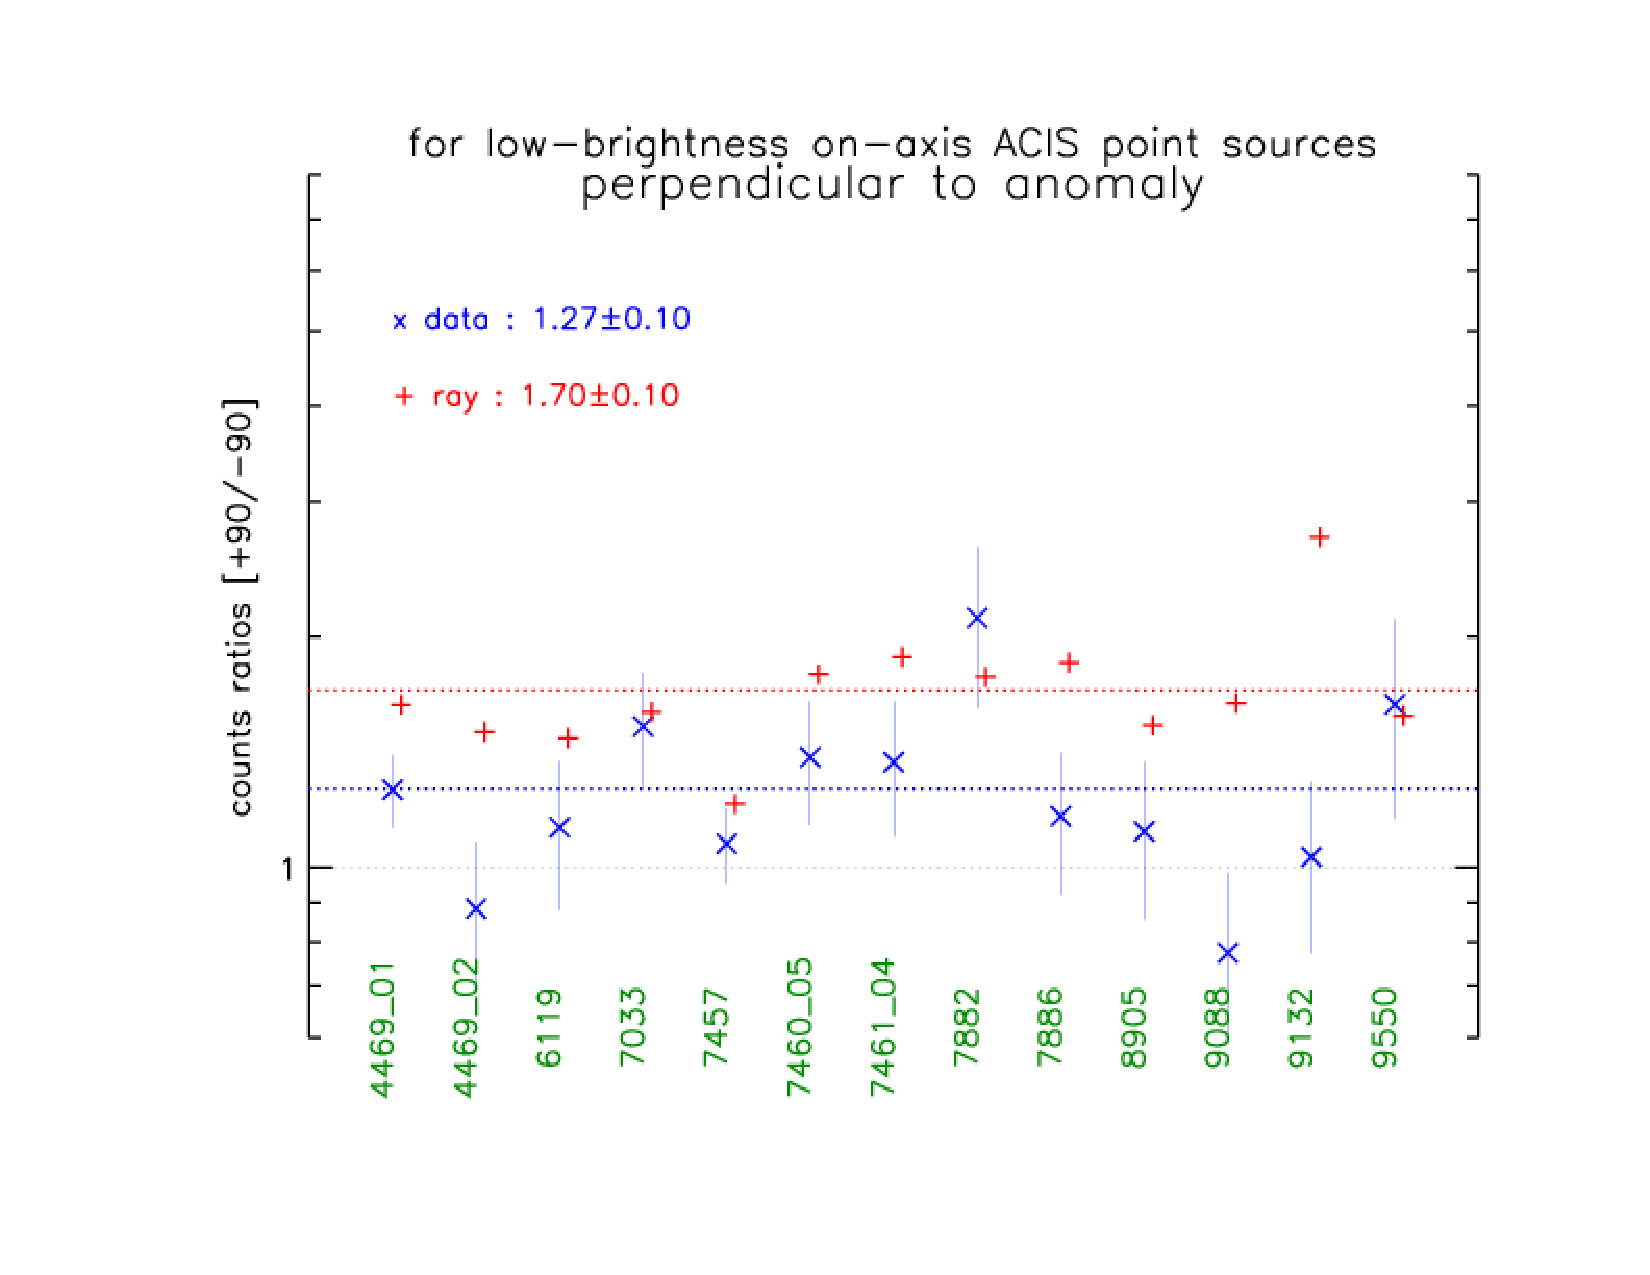 images/cf_anomaly_ratios_acis_perp2.png